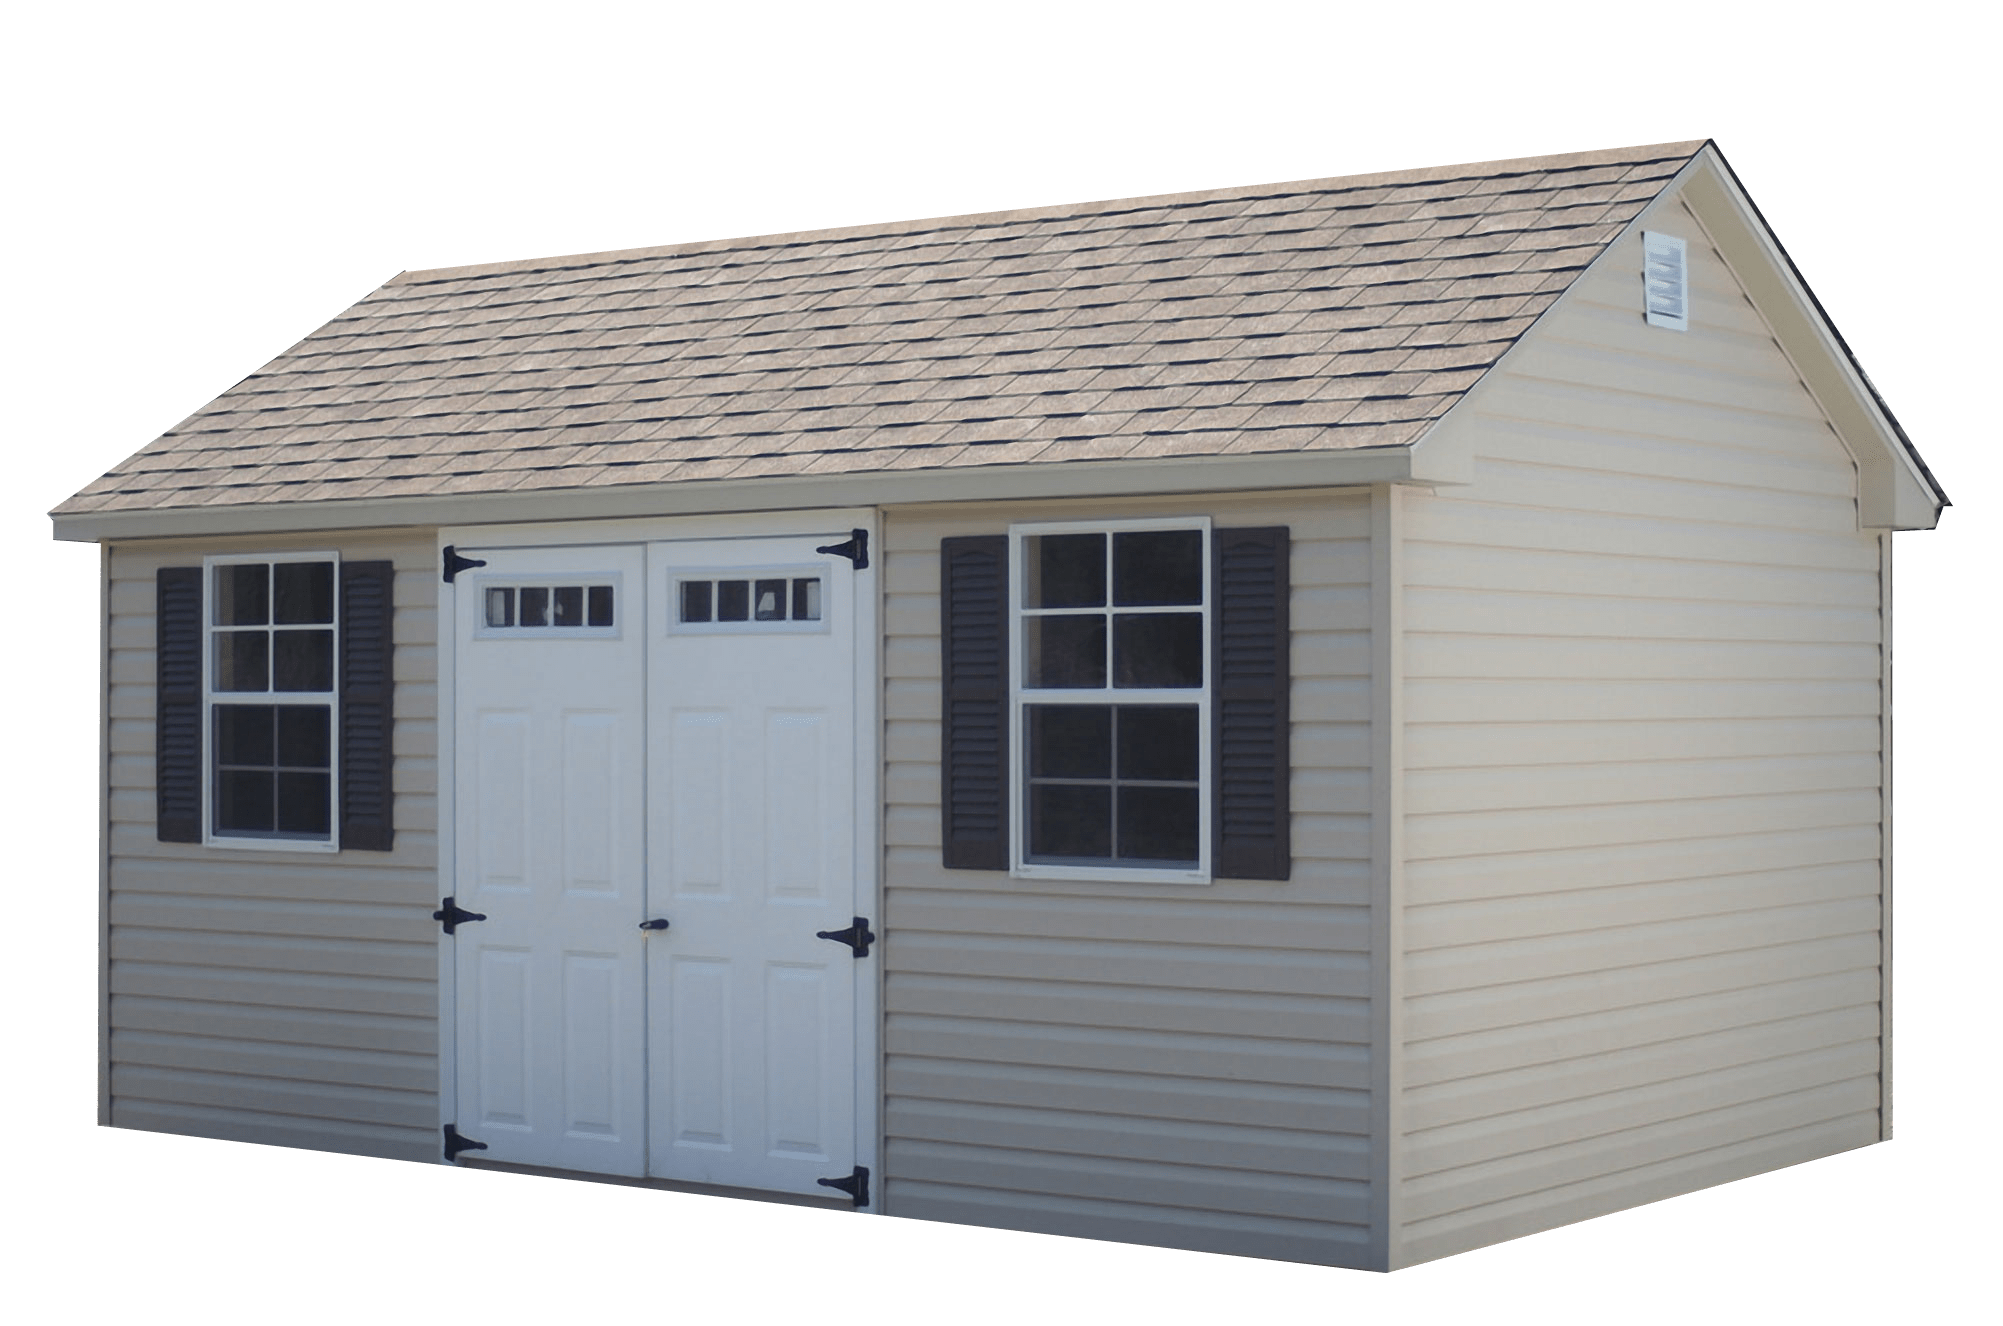 Tan vinyl shed with shingled roof